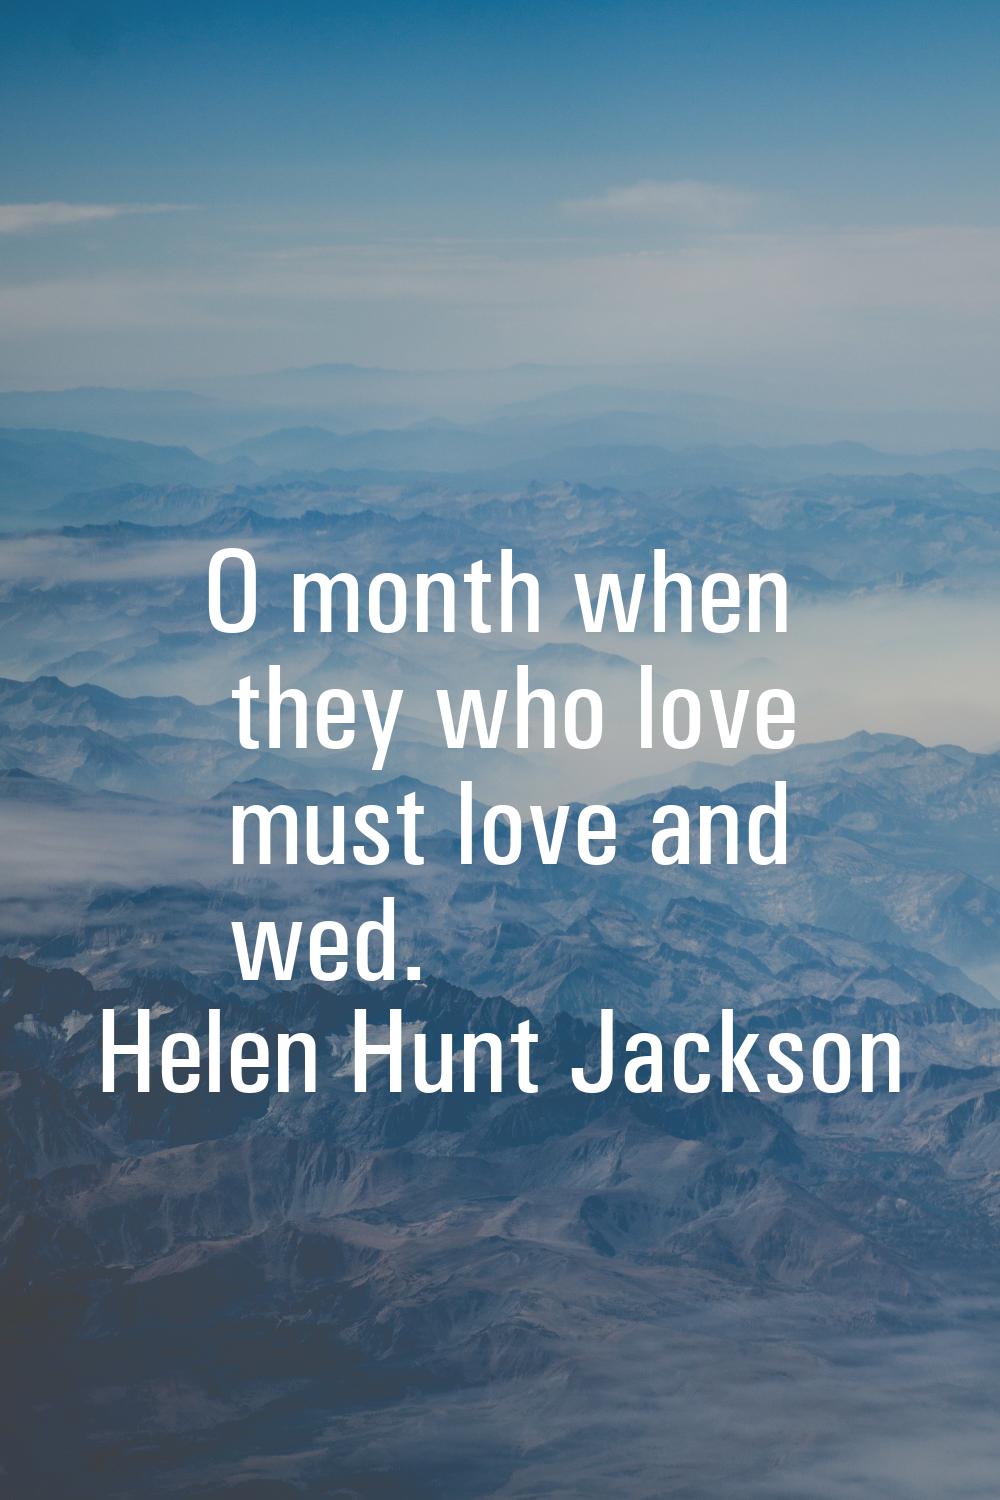 O month when they who love must love and wed.